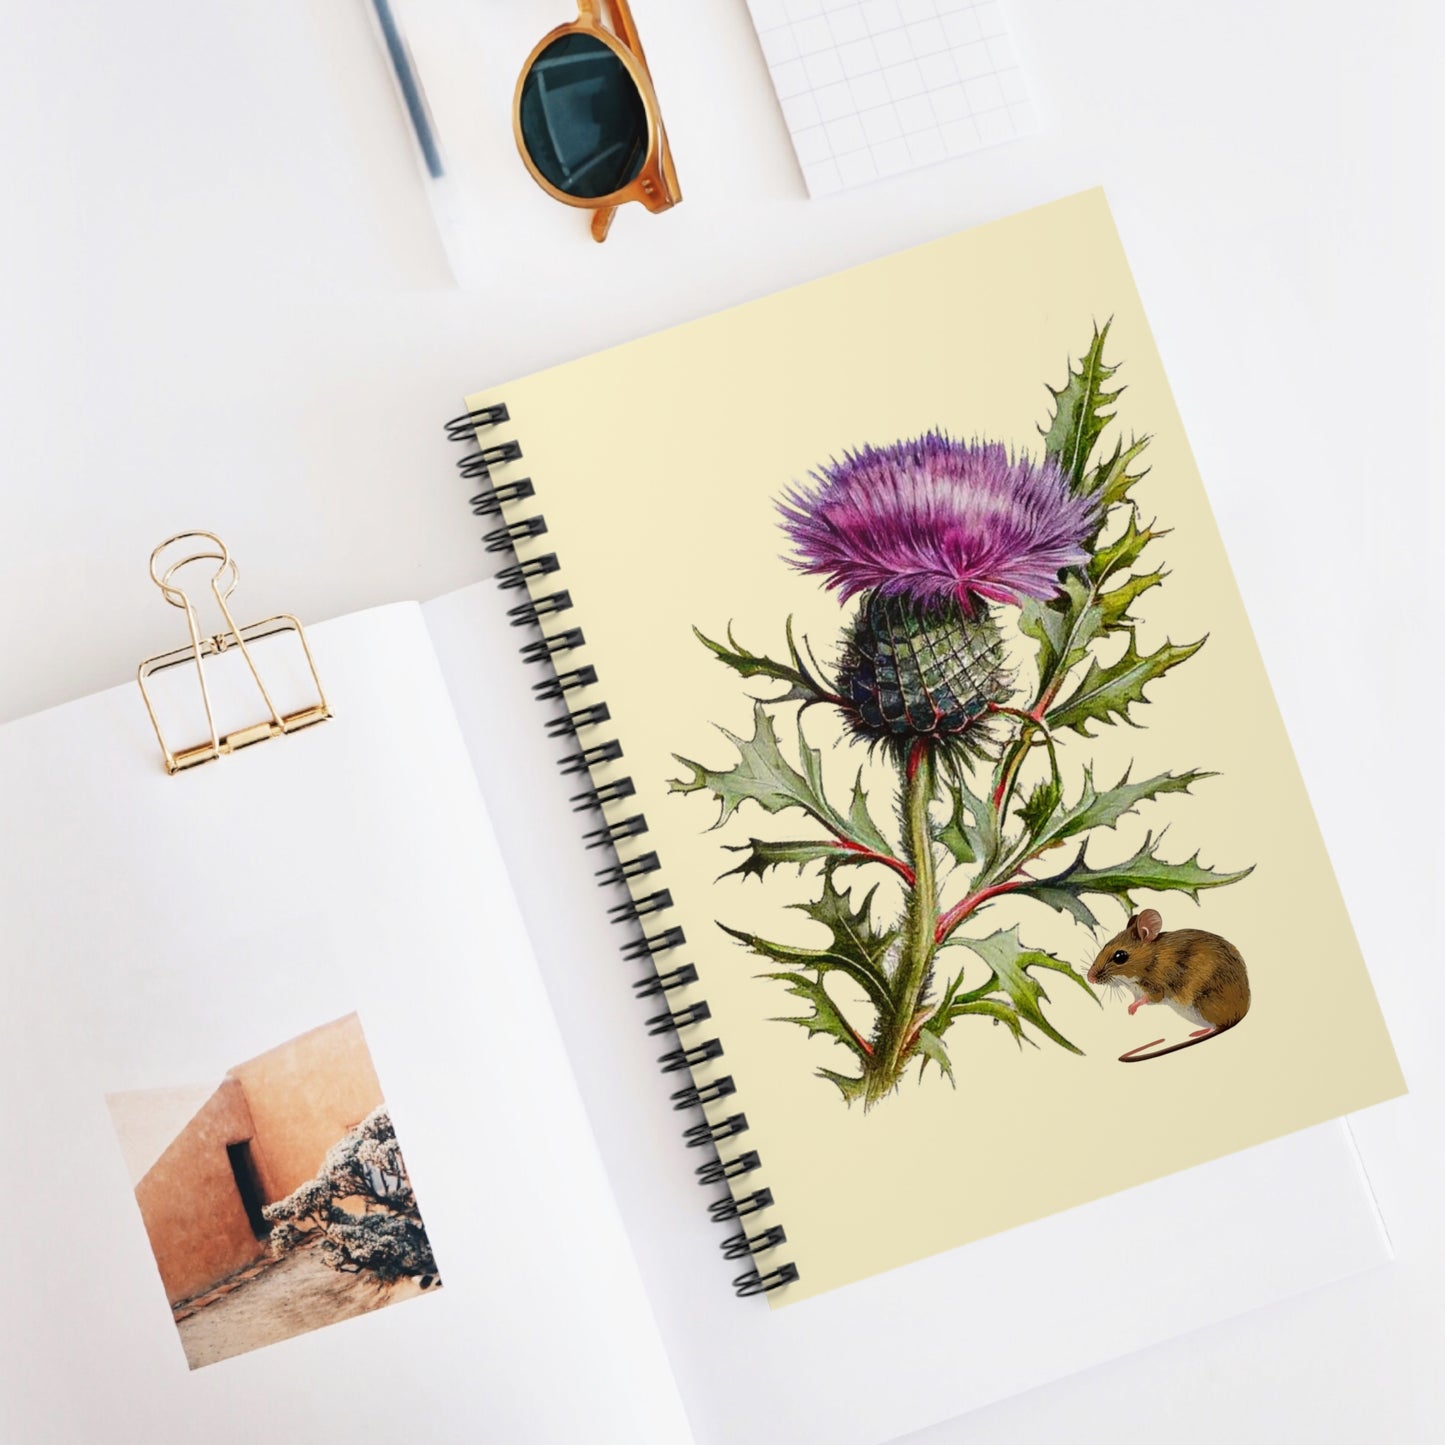 Thistle Mouse Spiral Notebook